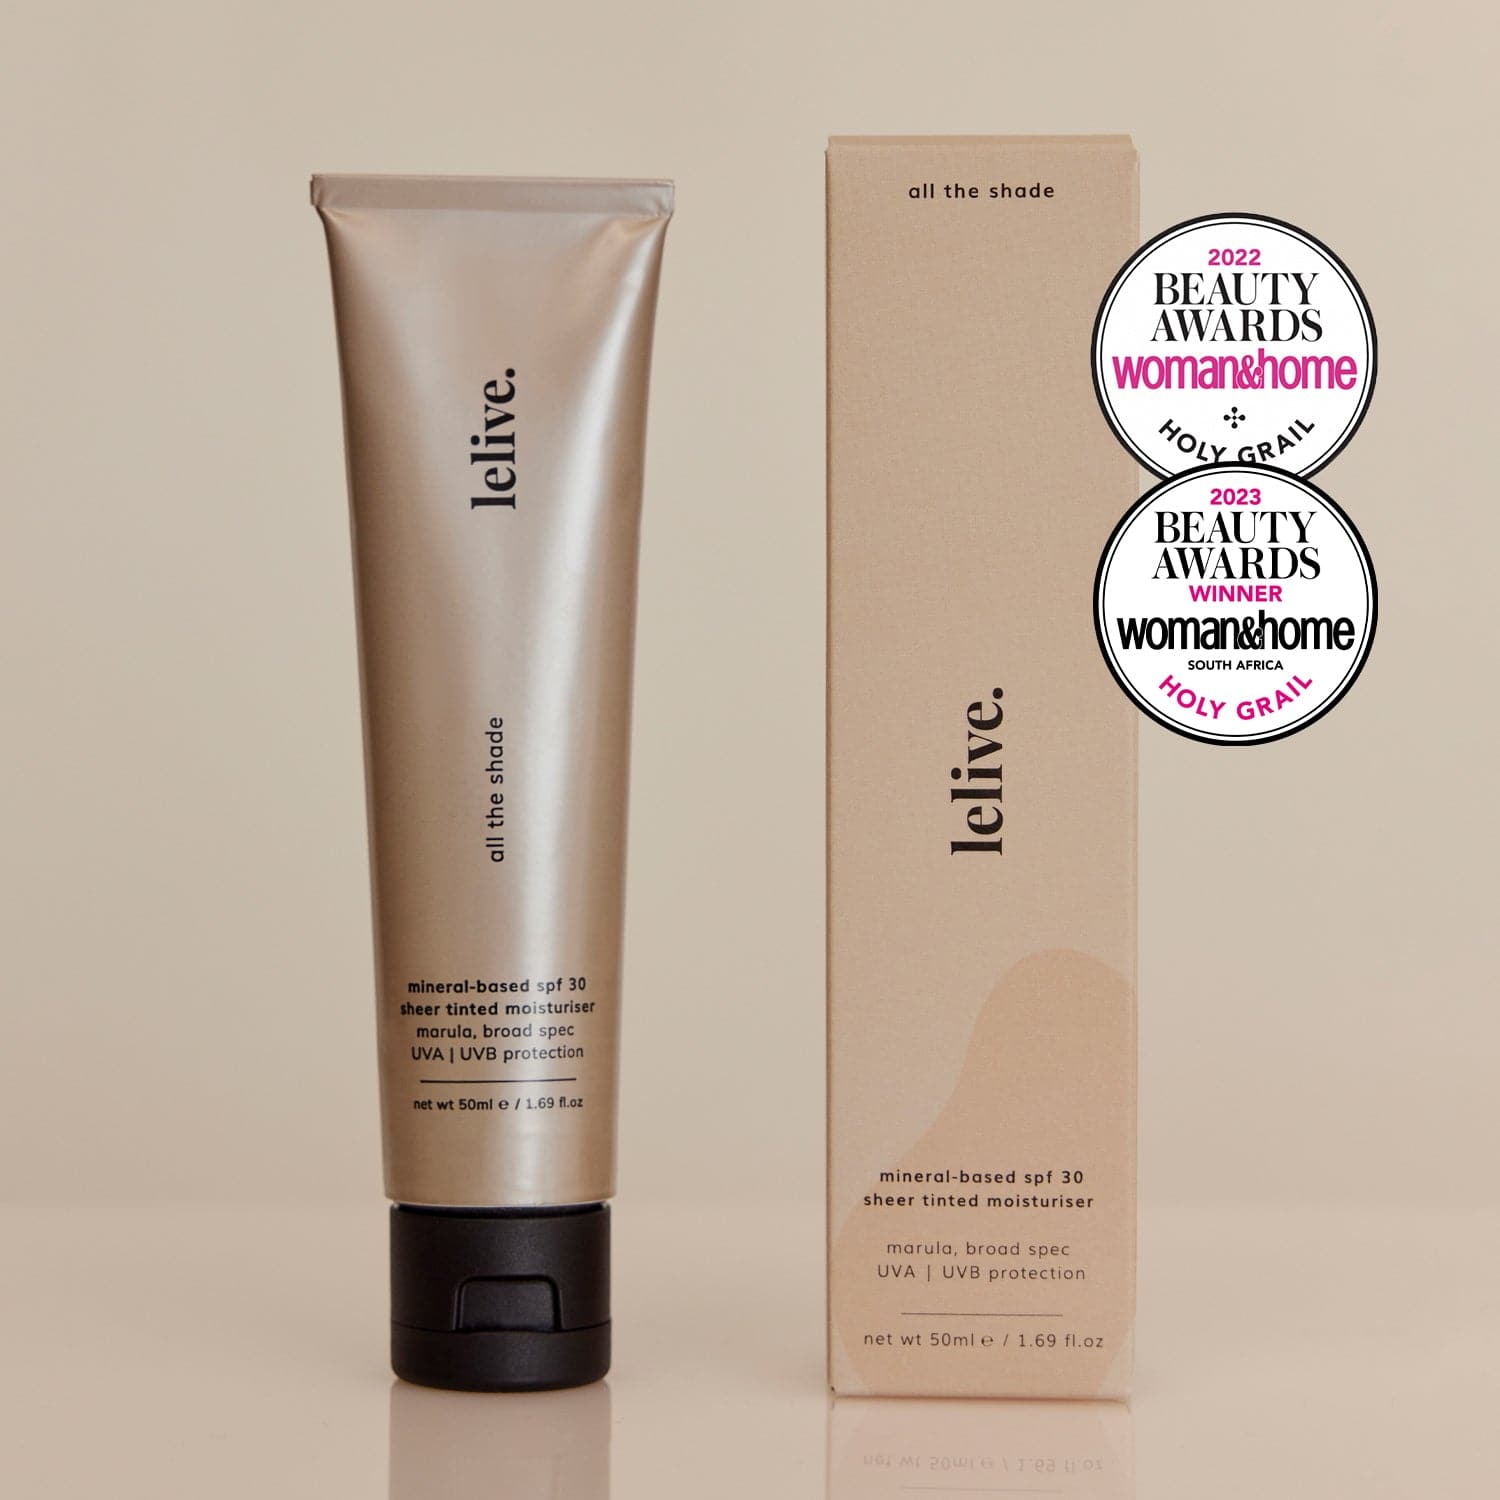 all the shade | spf 30 sheer tinted moisturiser - lelive